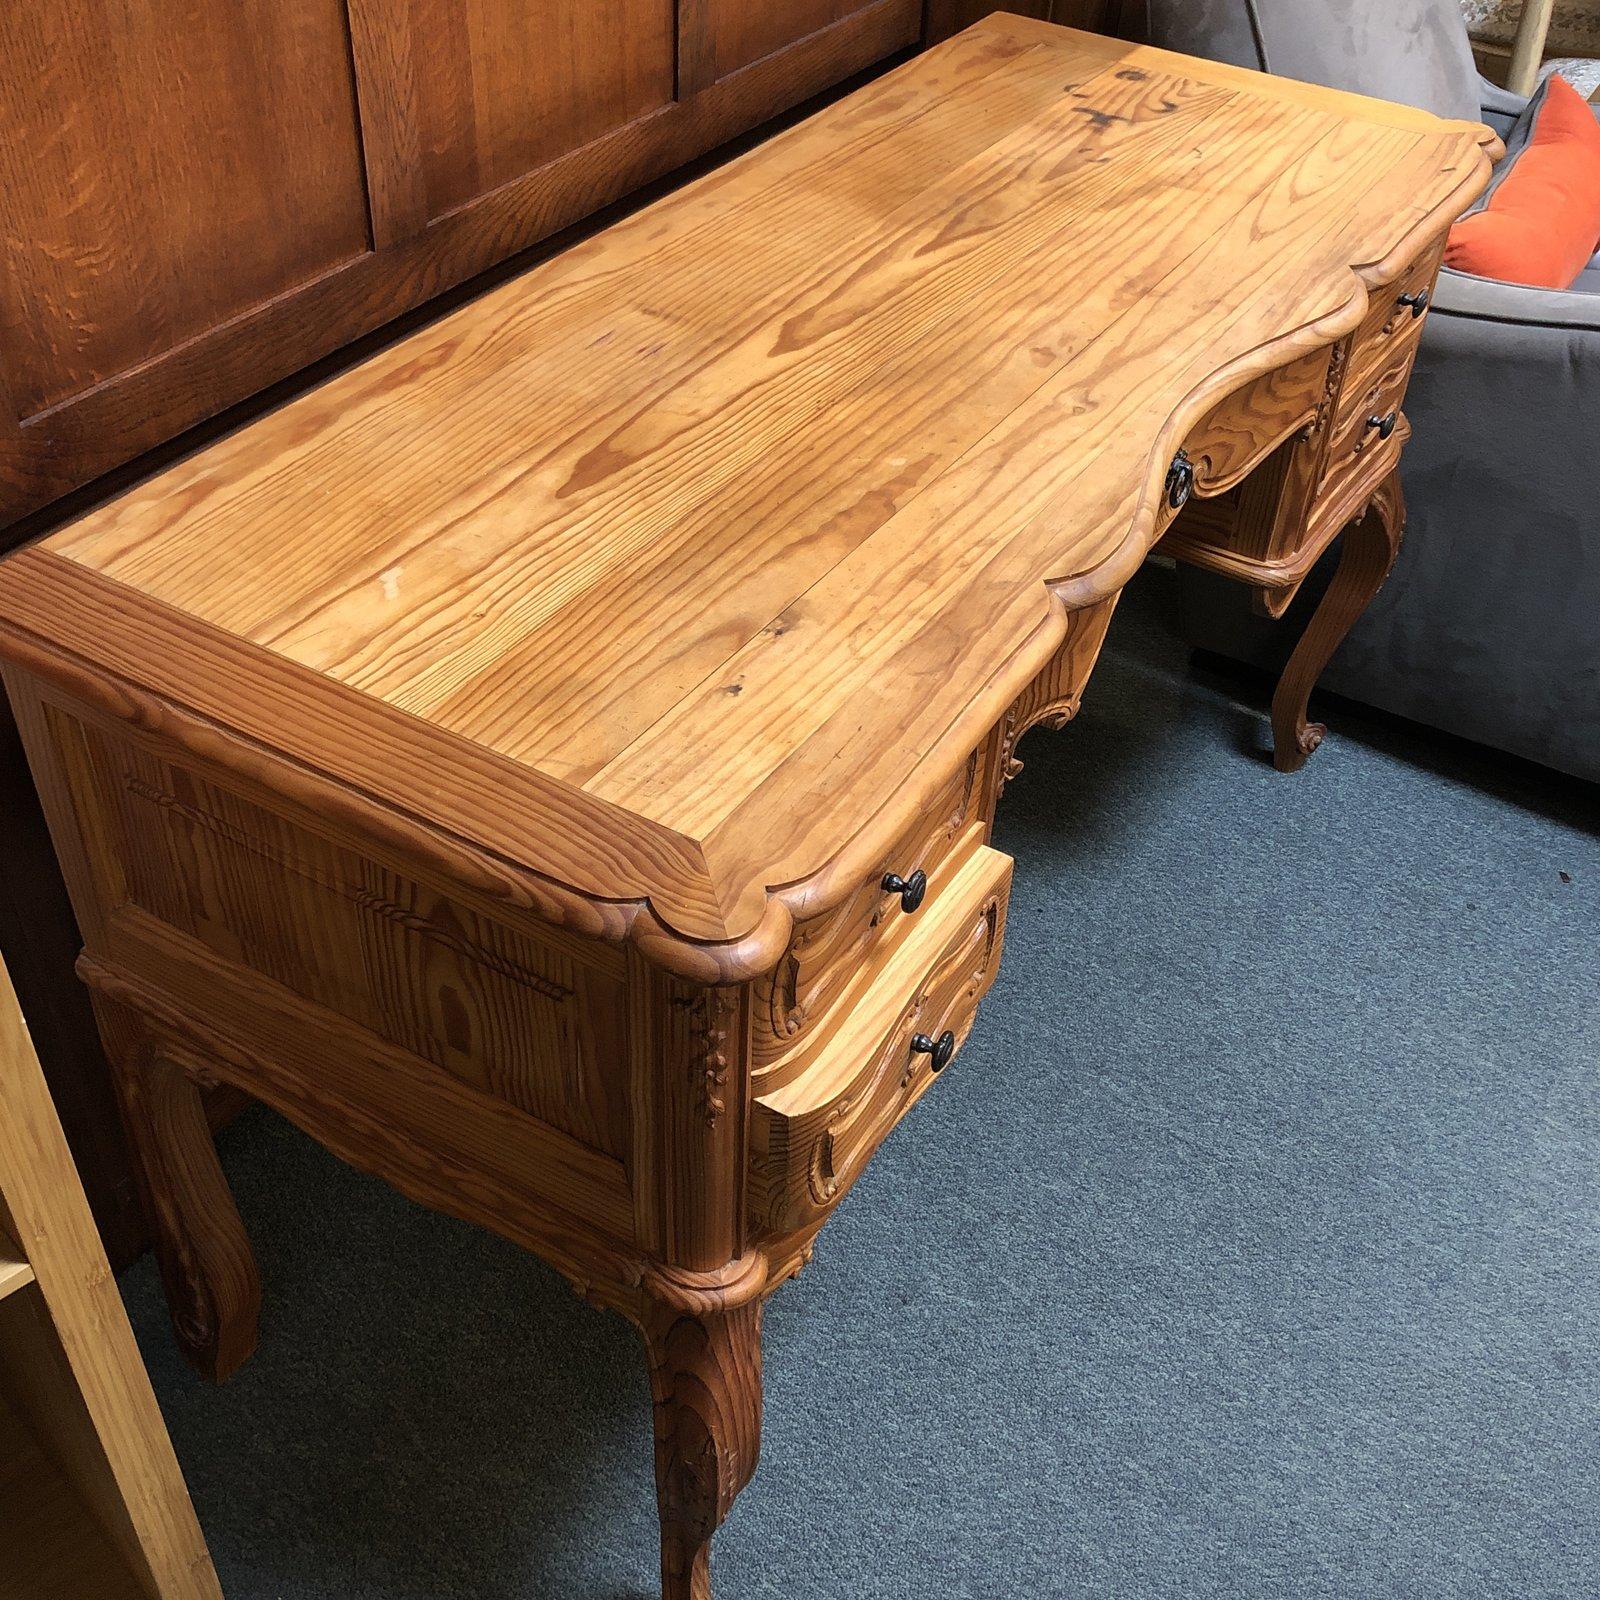 A vintage style writing desk. Crafted of natural pine, this charmer struts sinuous curving legs and curves, along with plenty of useful storage.